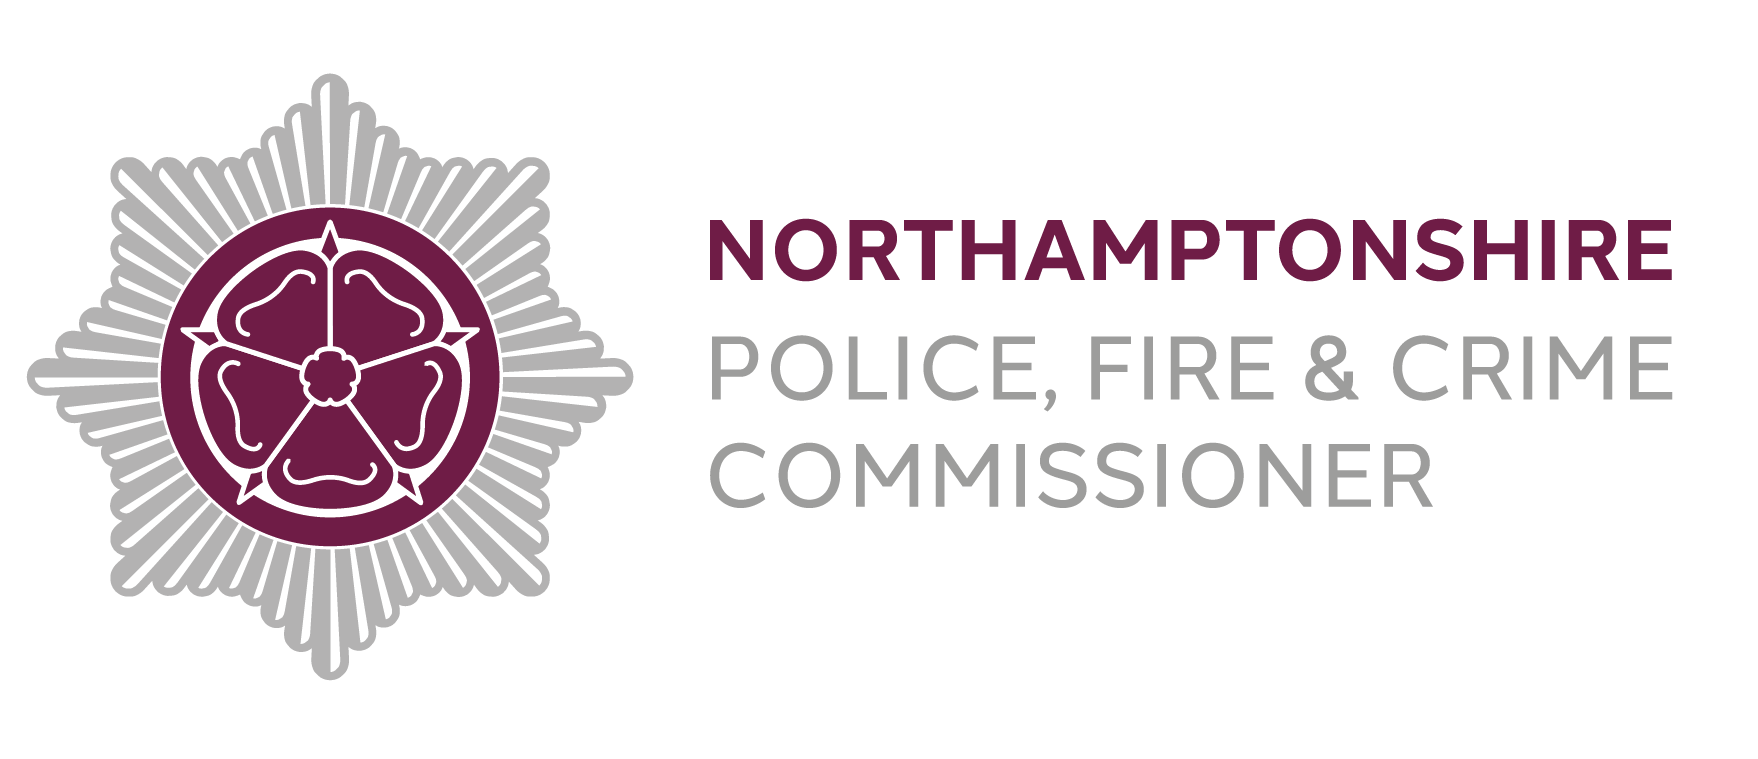 Northamptonshire Police & Fire Commissioner Logo